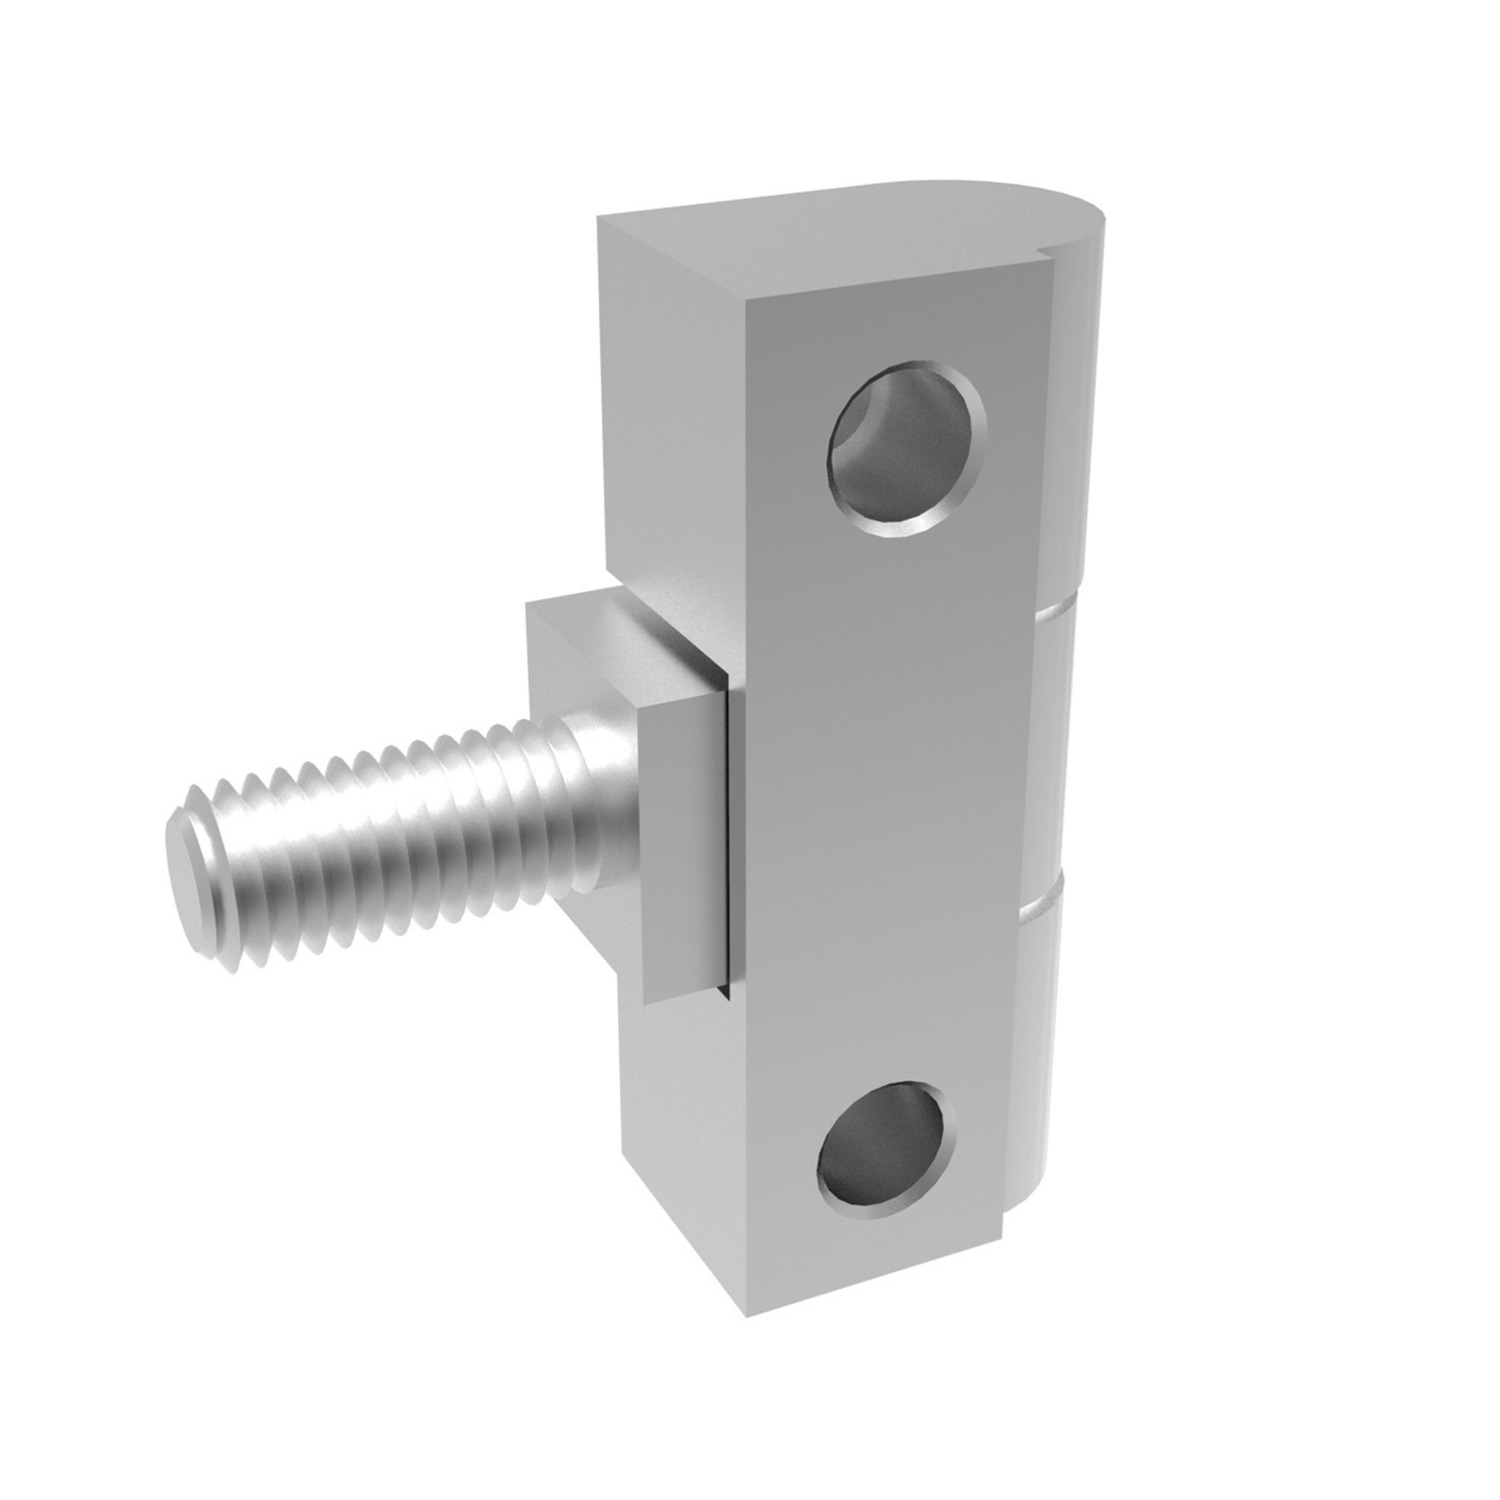 S1174.AW0010 Surface Mount Hinge intergrated stud & screw mount